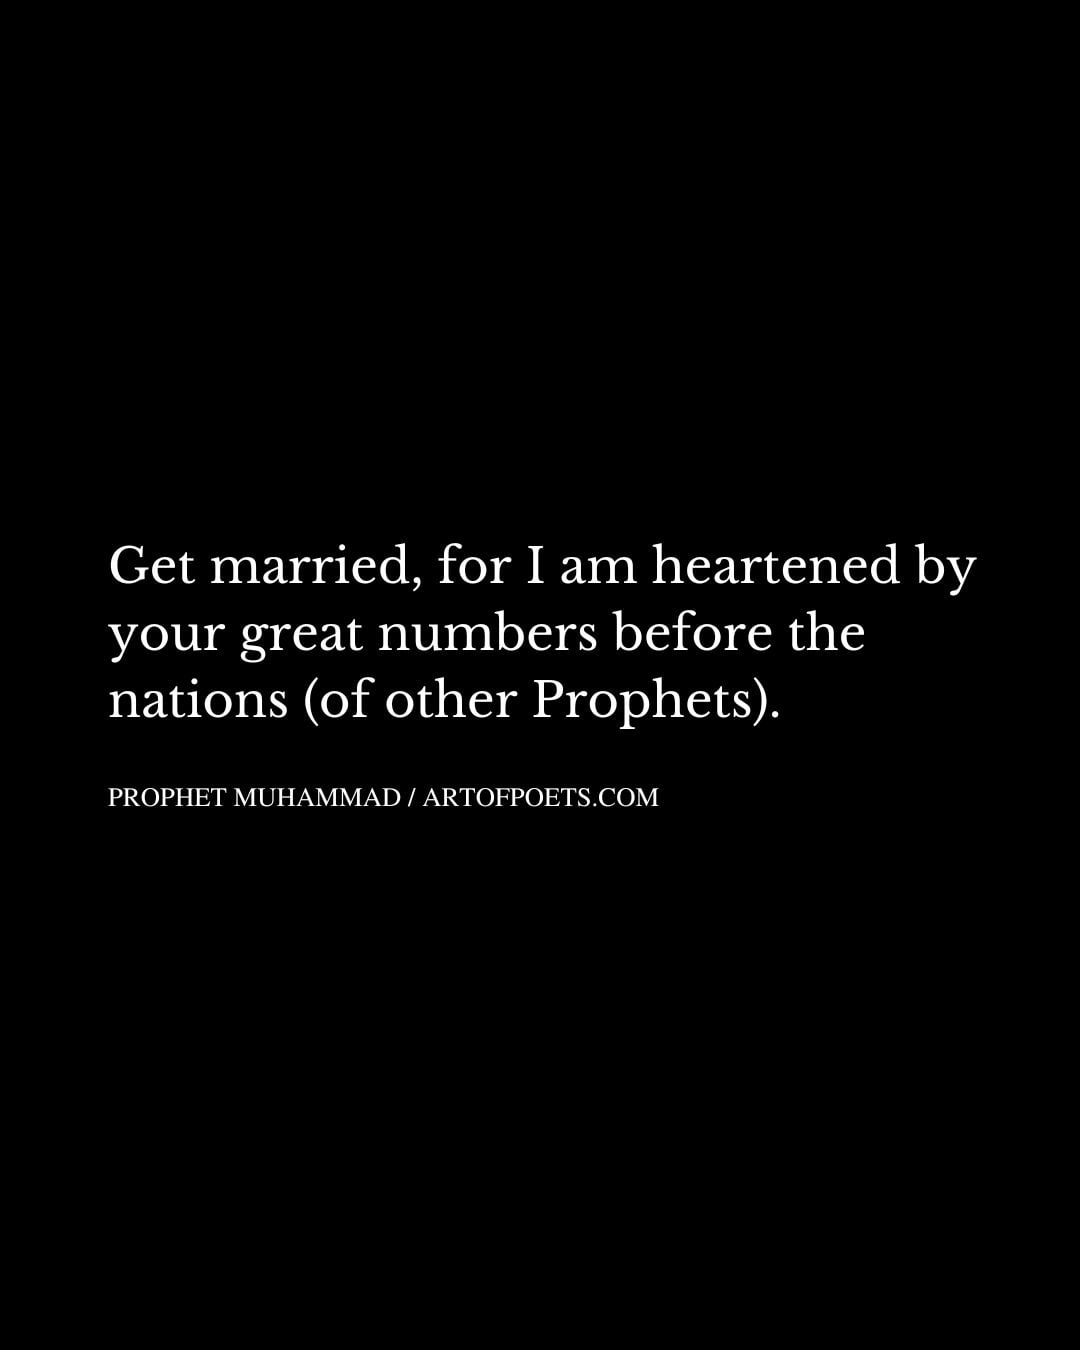 Get married for I am heartened by your great numbers before the nations of other Prophets